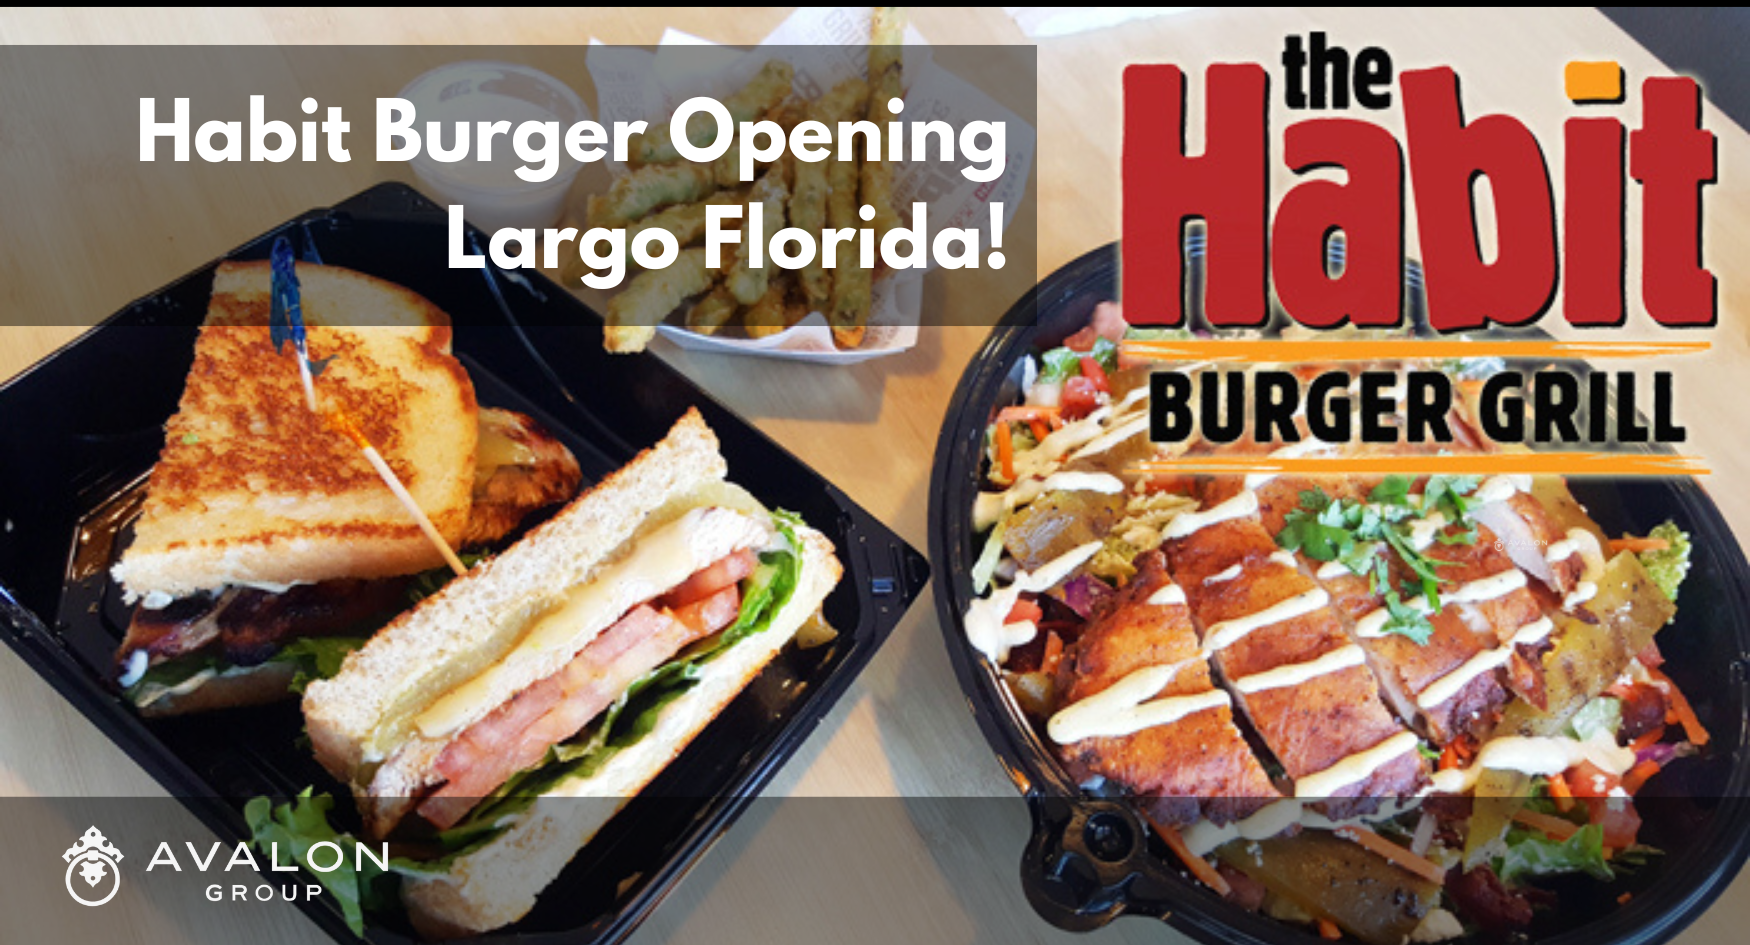 Picture shows a club sandwich and a Chrburger from the Habit Burger of Santa Barbara California.